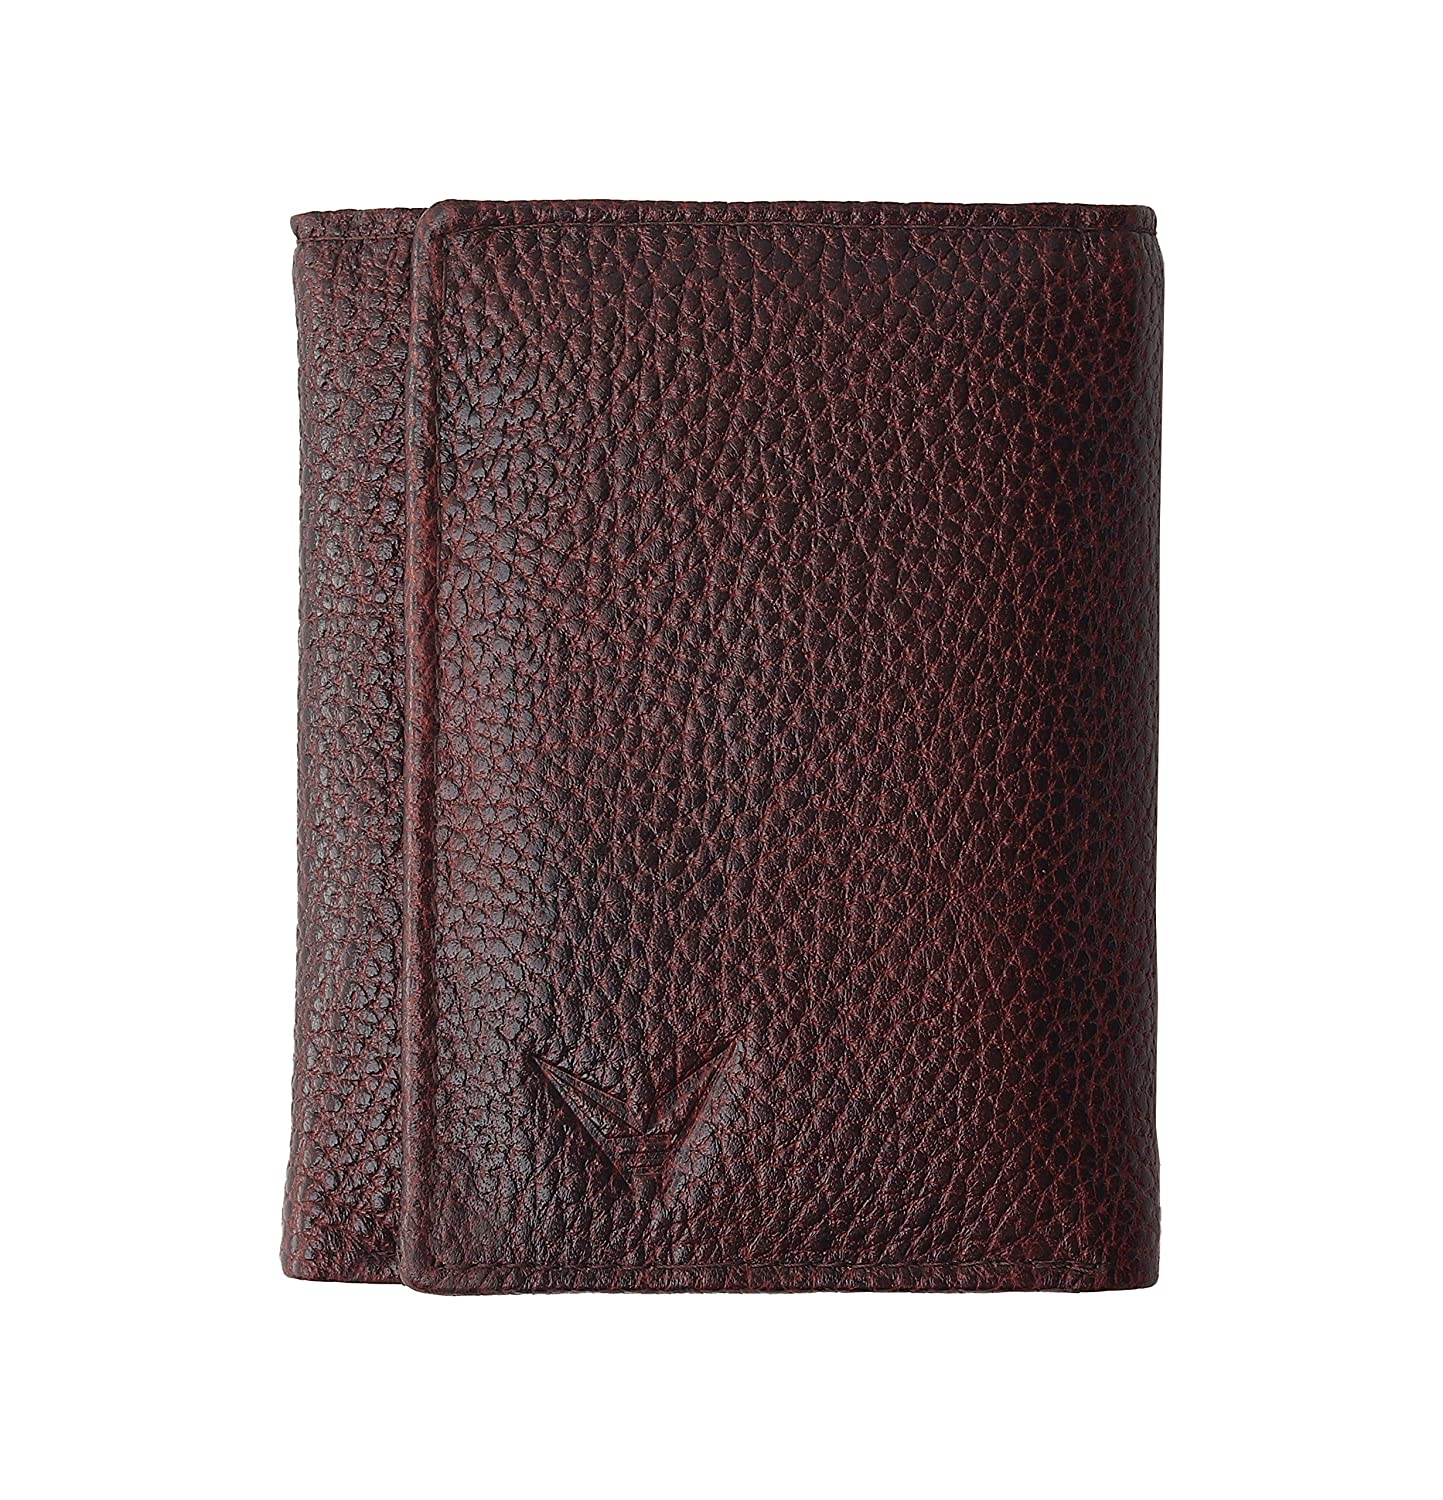 Buy These Mens Wallet New Designs for the Macho Man